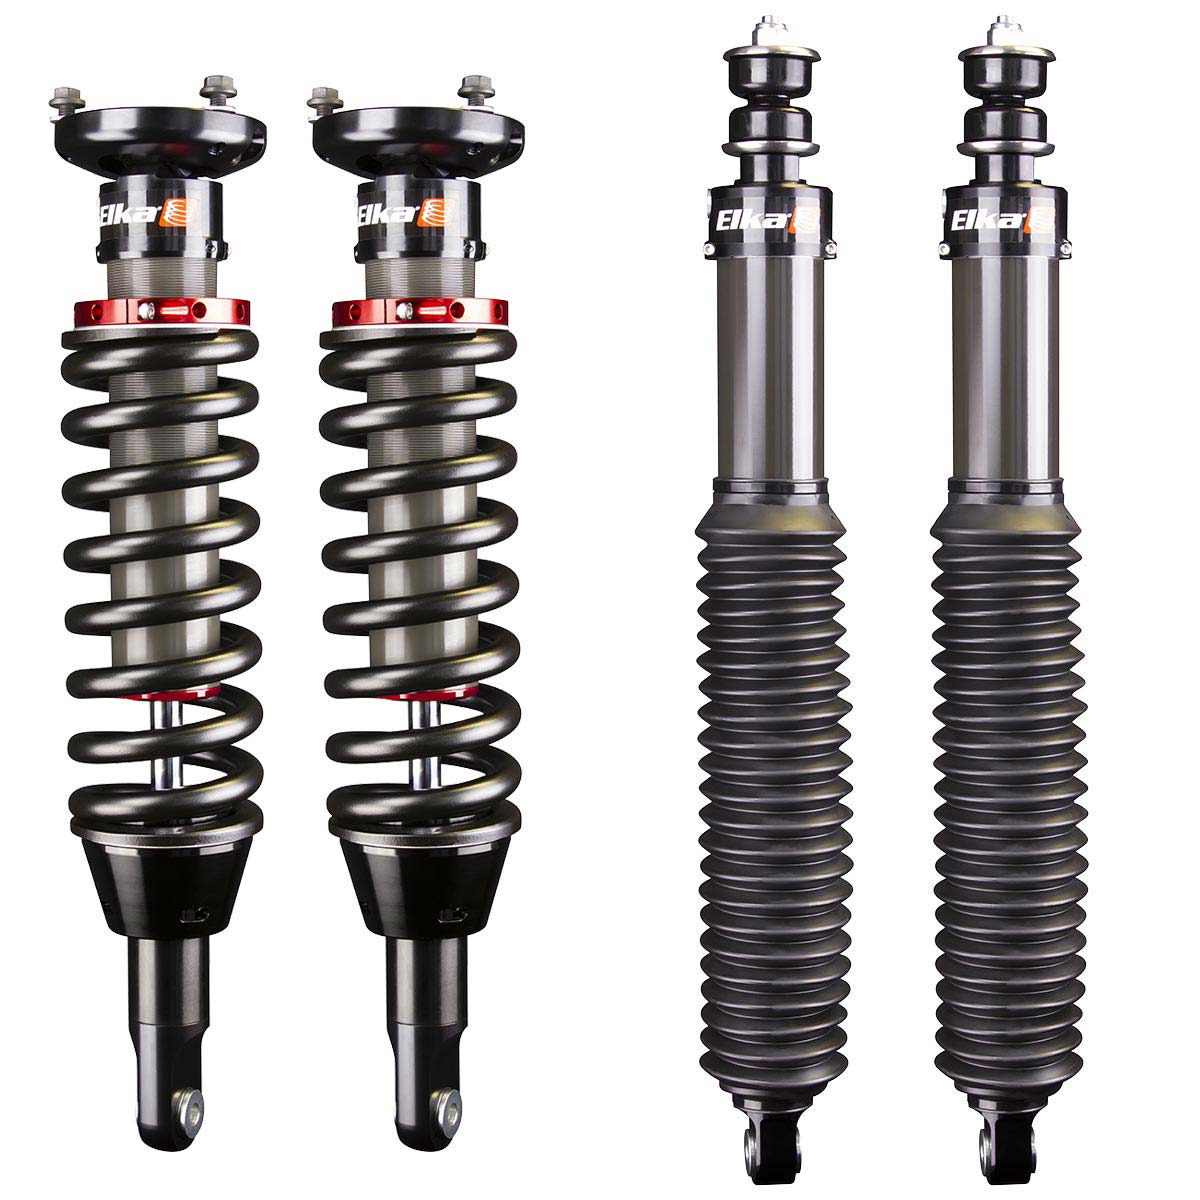 Elka 2.5 IFP FRONT & REAR SHOCKS KIT for TOYOTA 4RUNNER, 2010 to 2020 (with KDSS) (2 in. to 3 in. lift)